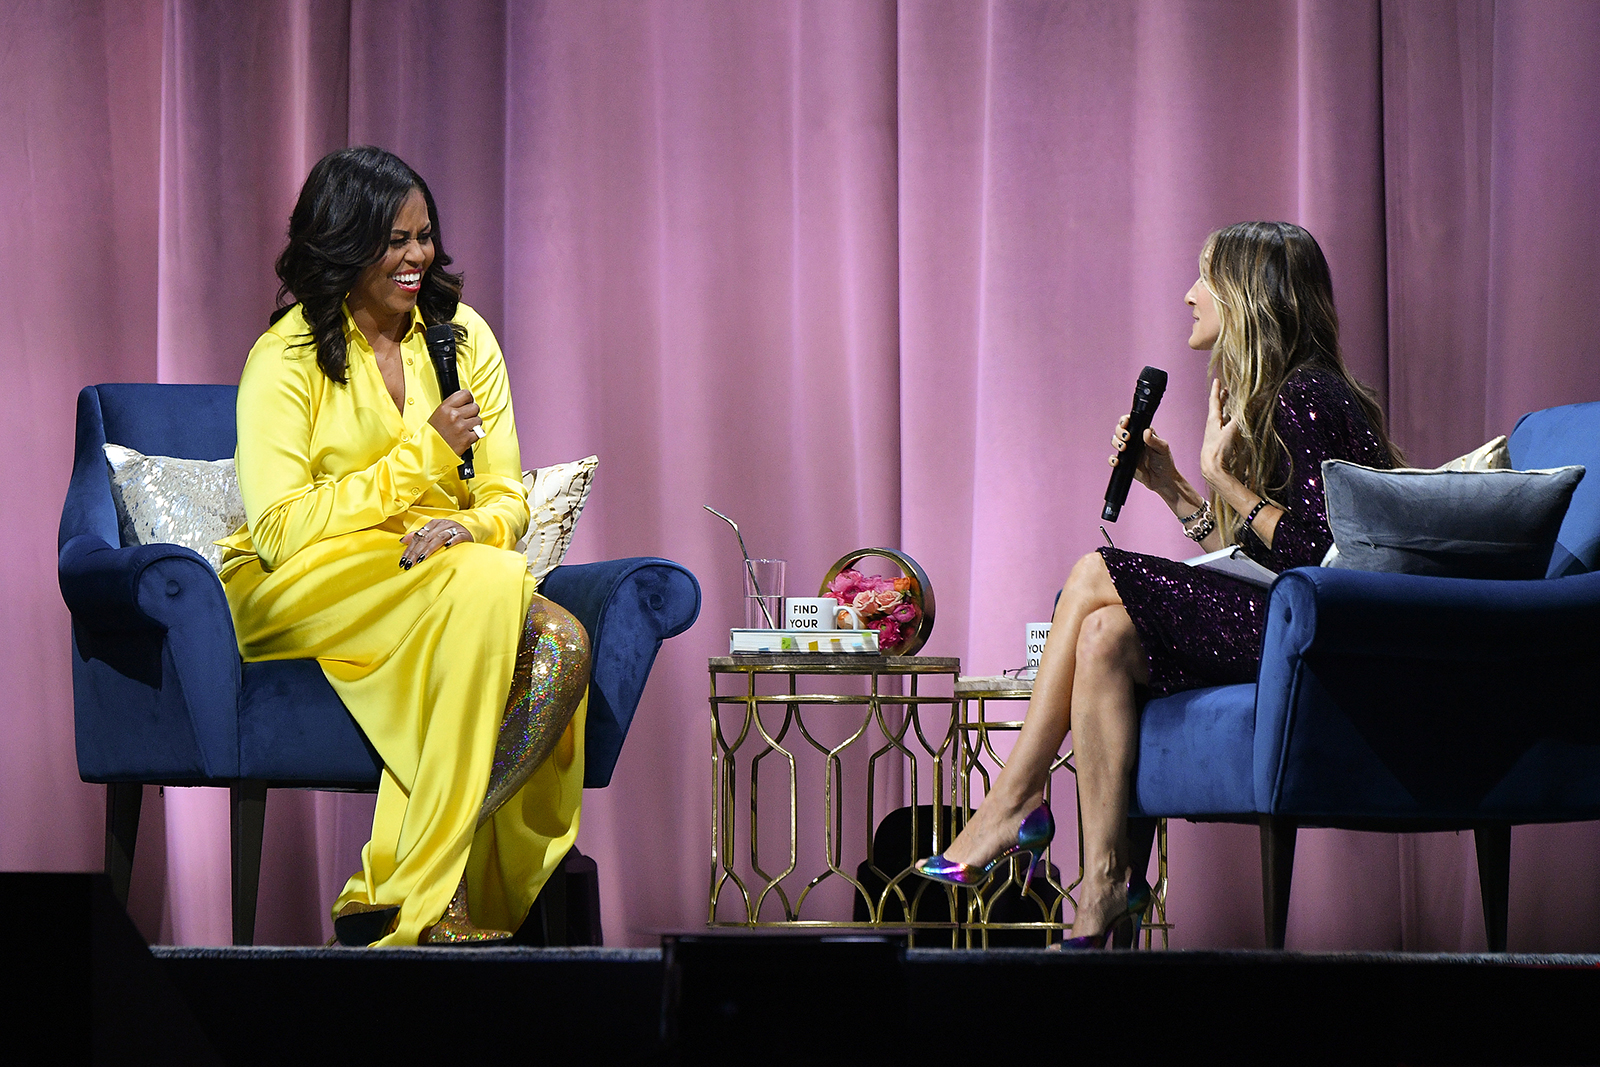 Michelle Obama Wearing a Yellow Dress and Sparkly Boots Is so Fire